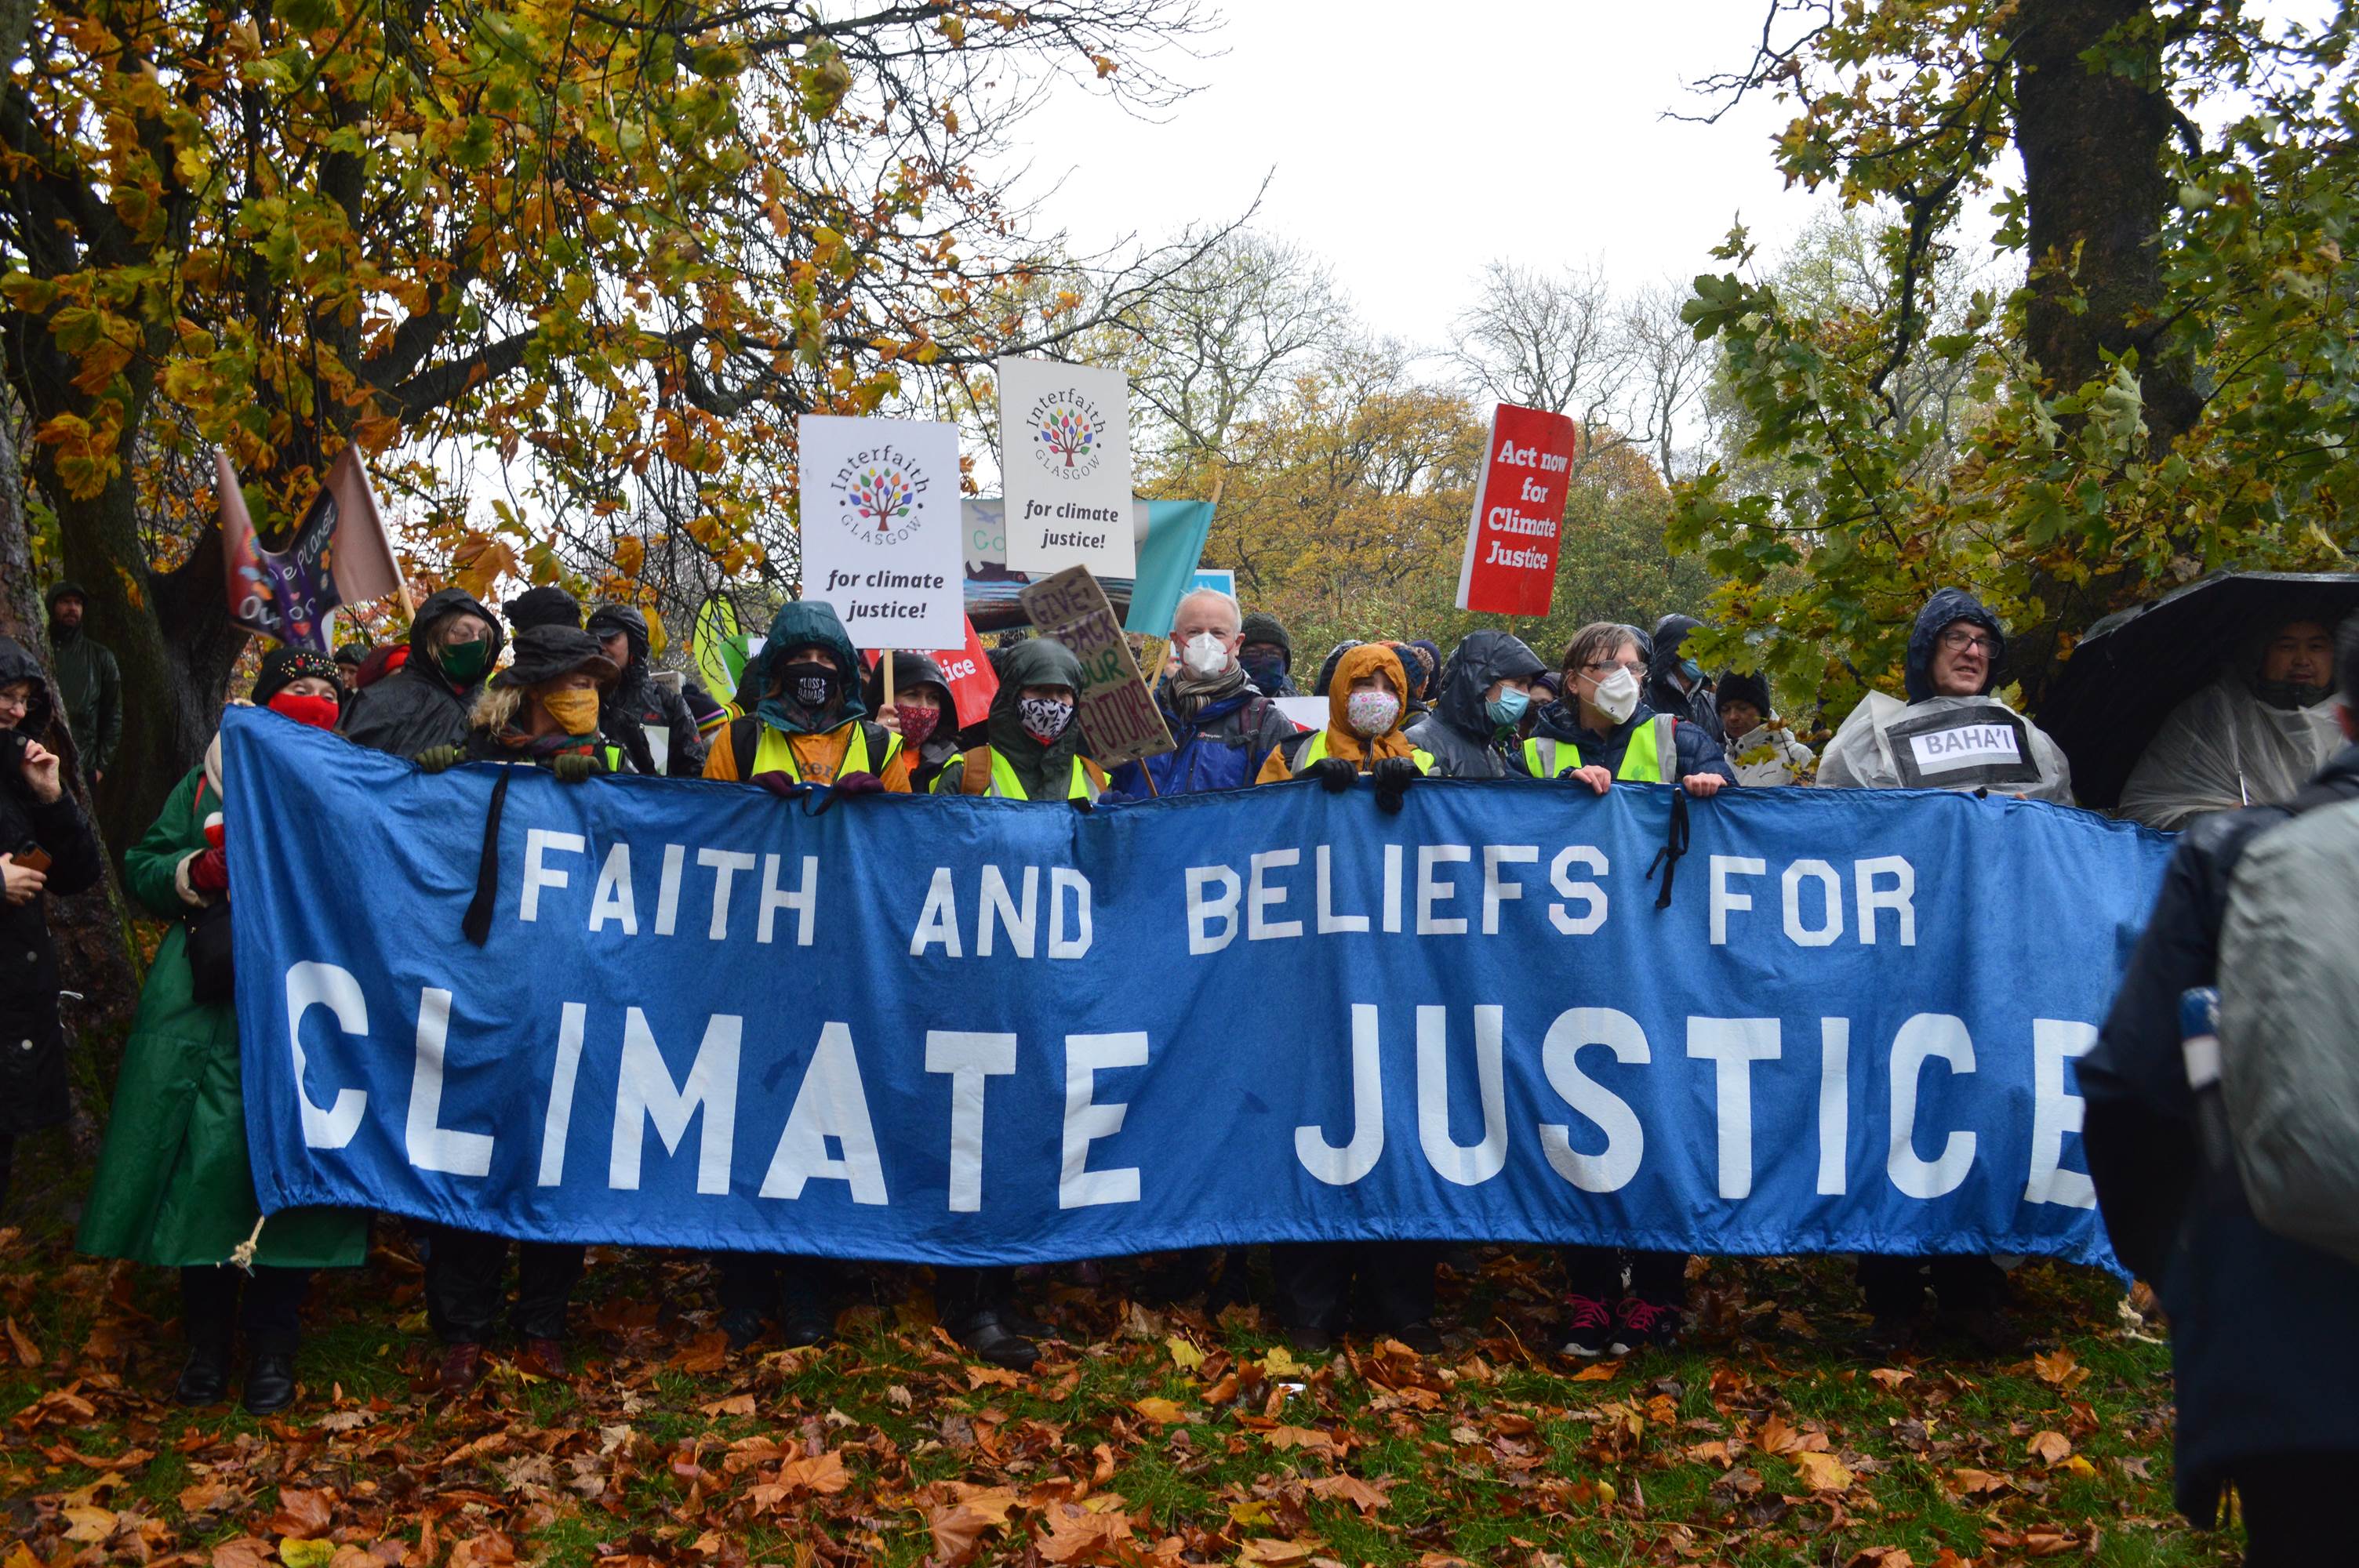 A banner promoting climate justice